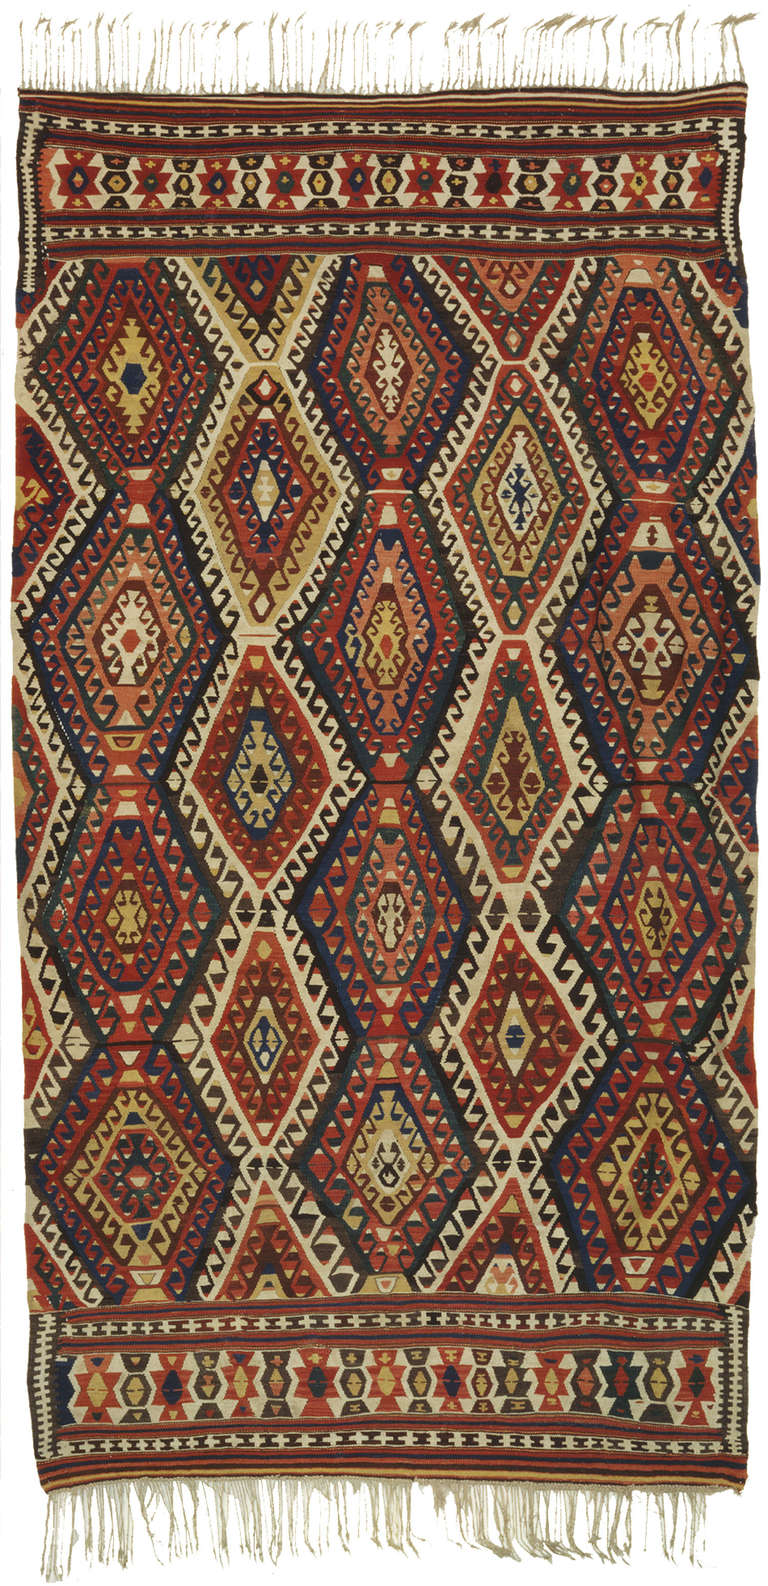 South Anatolian kilim, possibly from the Mut area. Ivory wool warps Z2S. Wool weft. Organic dyes. Good condition - very slight repair. Woven in one piece. It has large slits and a floppy handle.